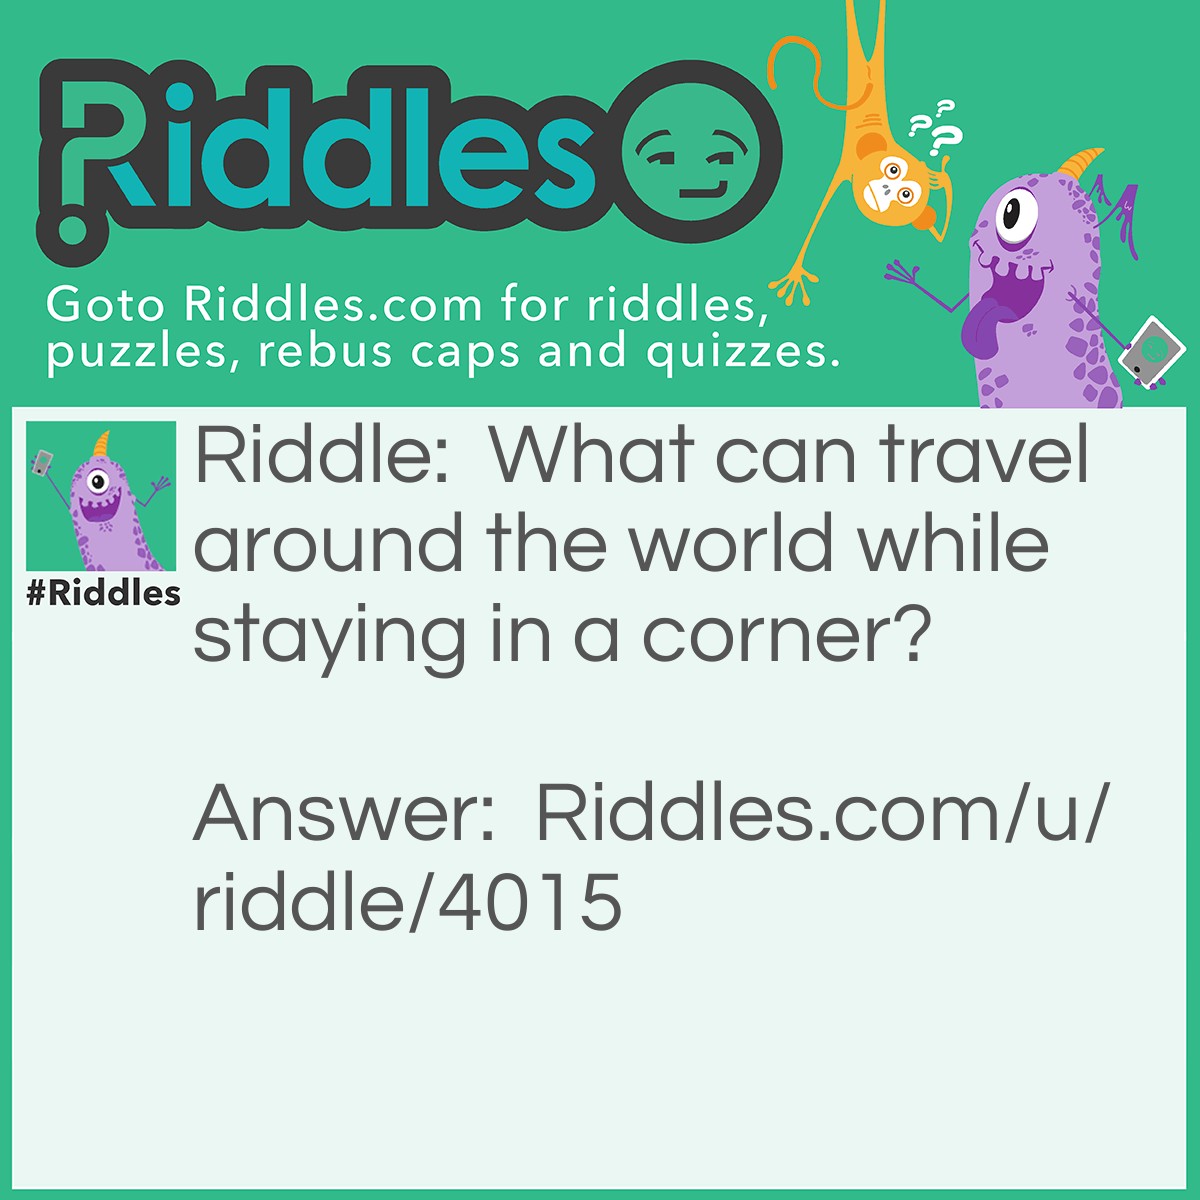 Riddle: What can travel around the world while staying in a corner? Answer: A stamp!